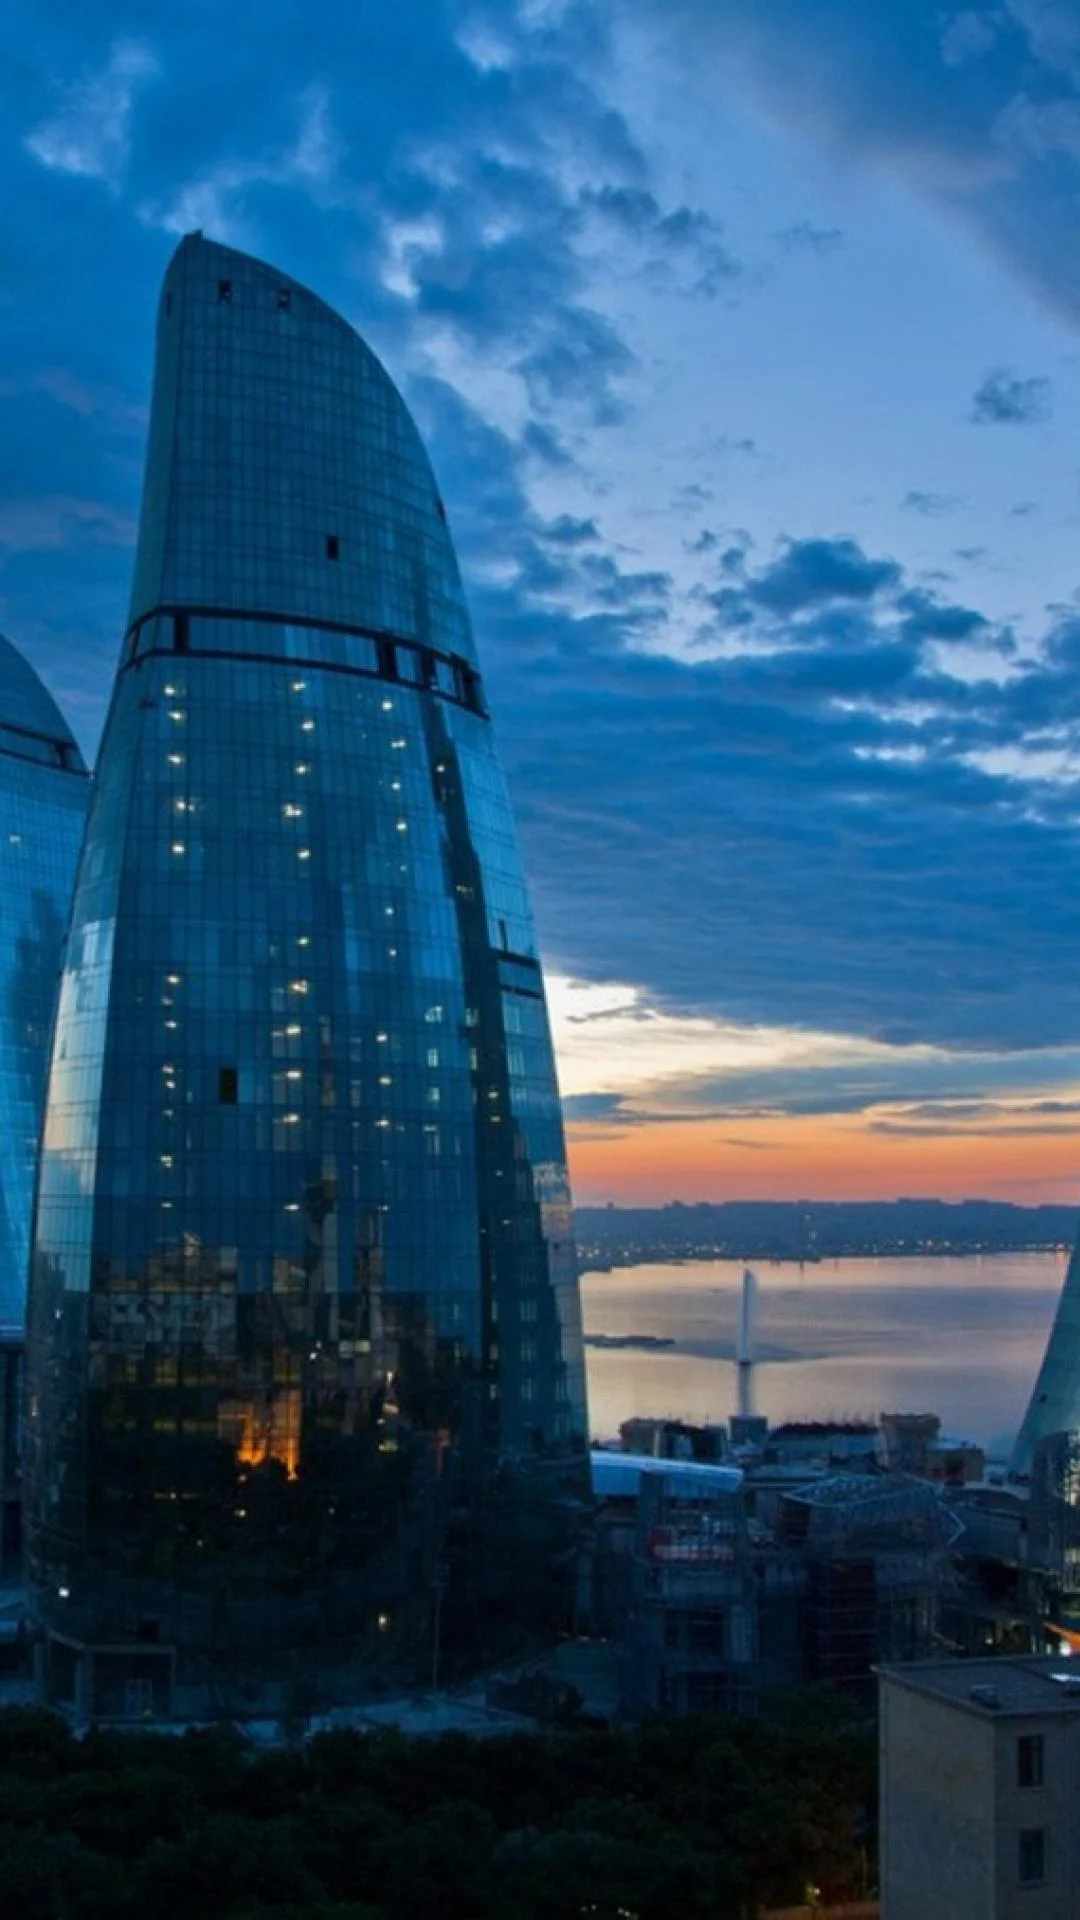 Azerbaijan: Baku, Listed 48th in the 2011 list of the most expensive cities in the world. 1080x1920 Full HD Wallpaper.